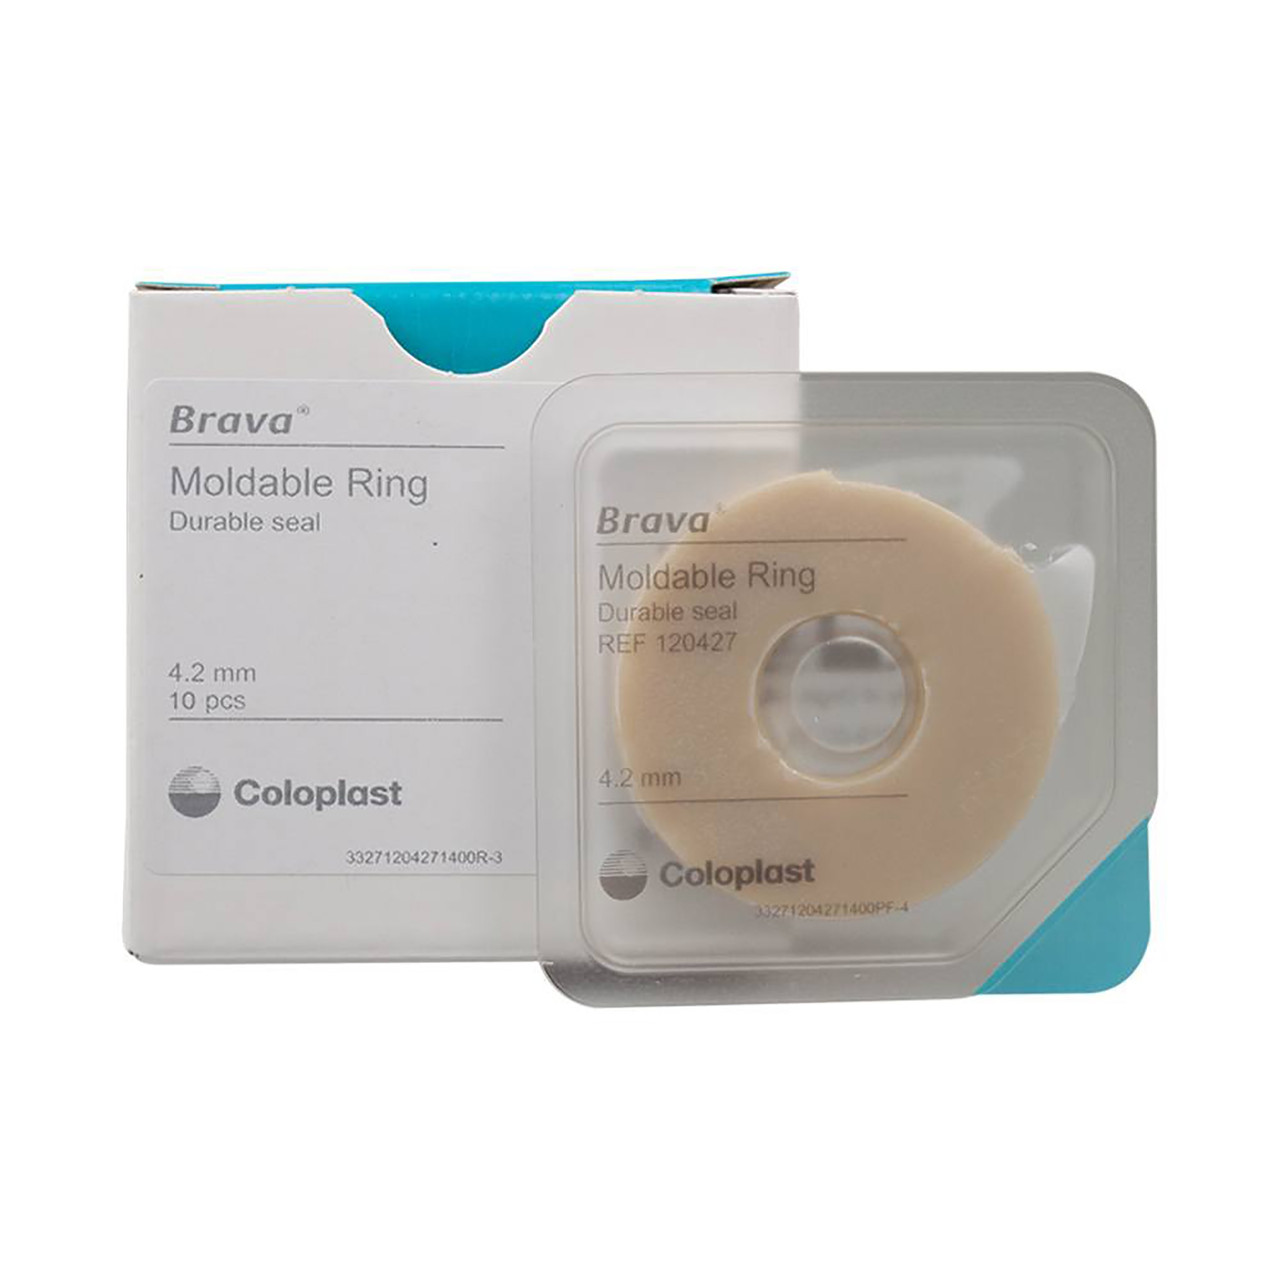 Brava Thick Moldable Ostomy Barrier Ring - Flat, 4.2 mm - Simply Medical